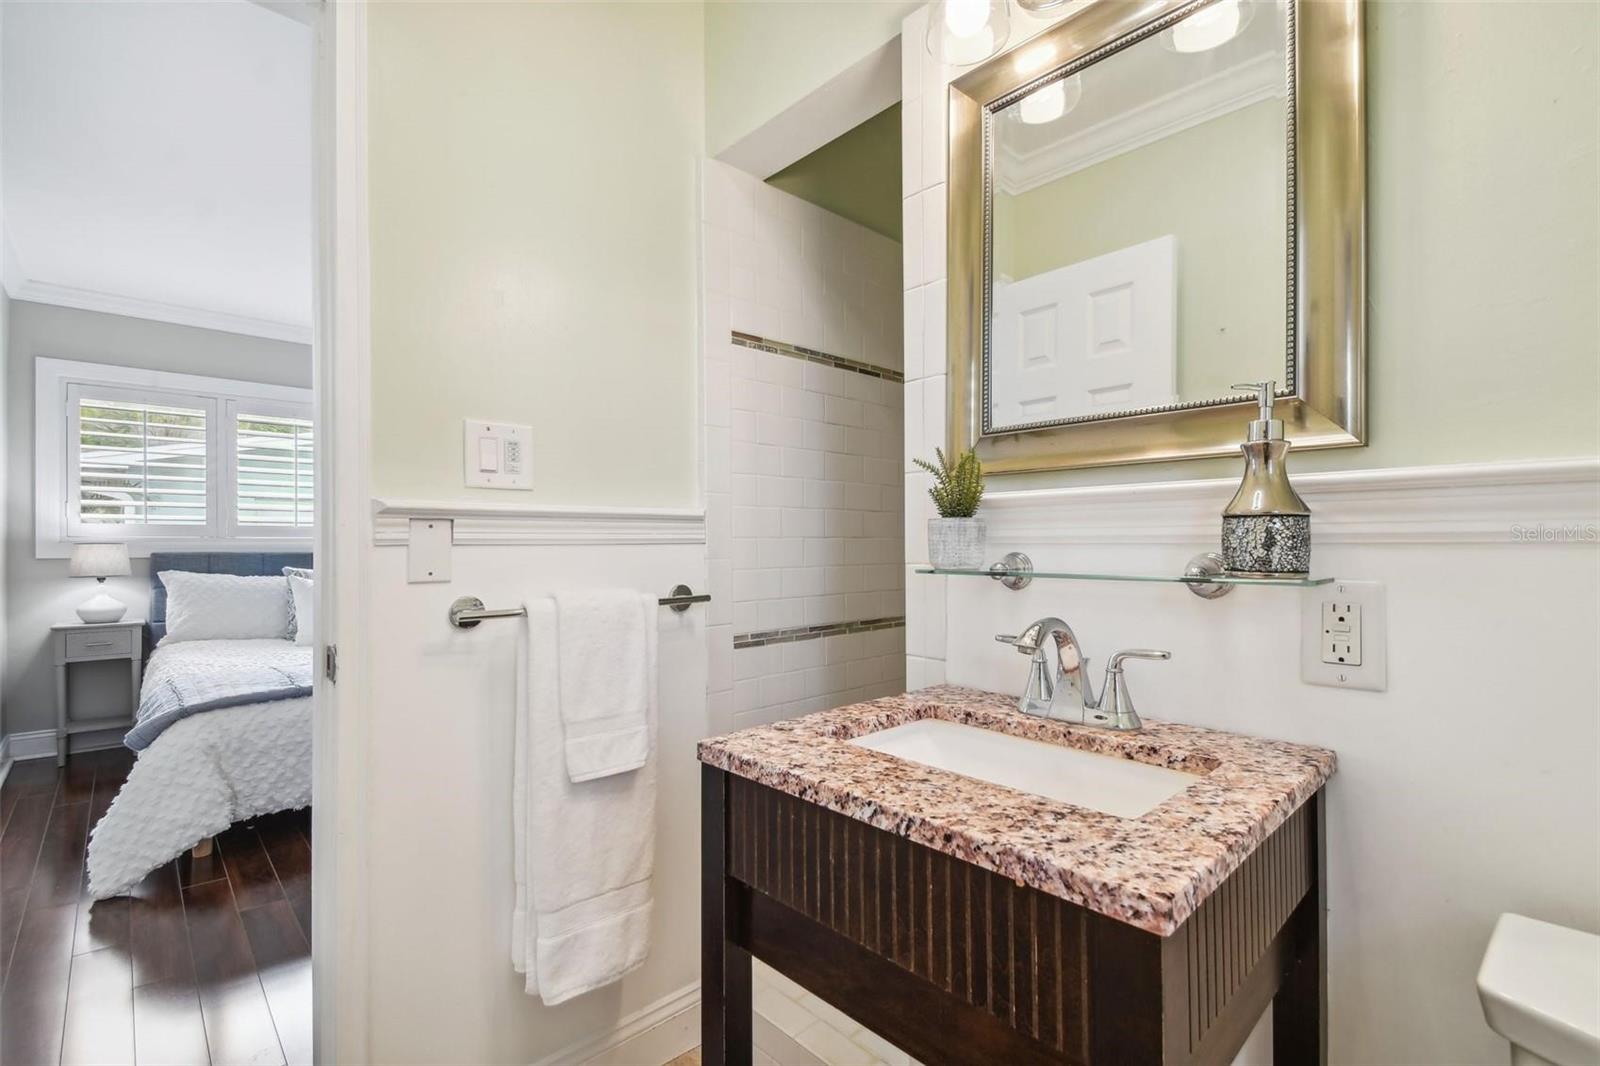 Bathroom with upgraded fixtures and lightning